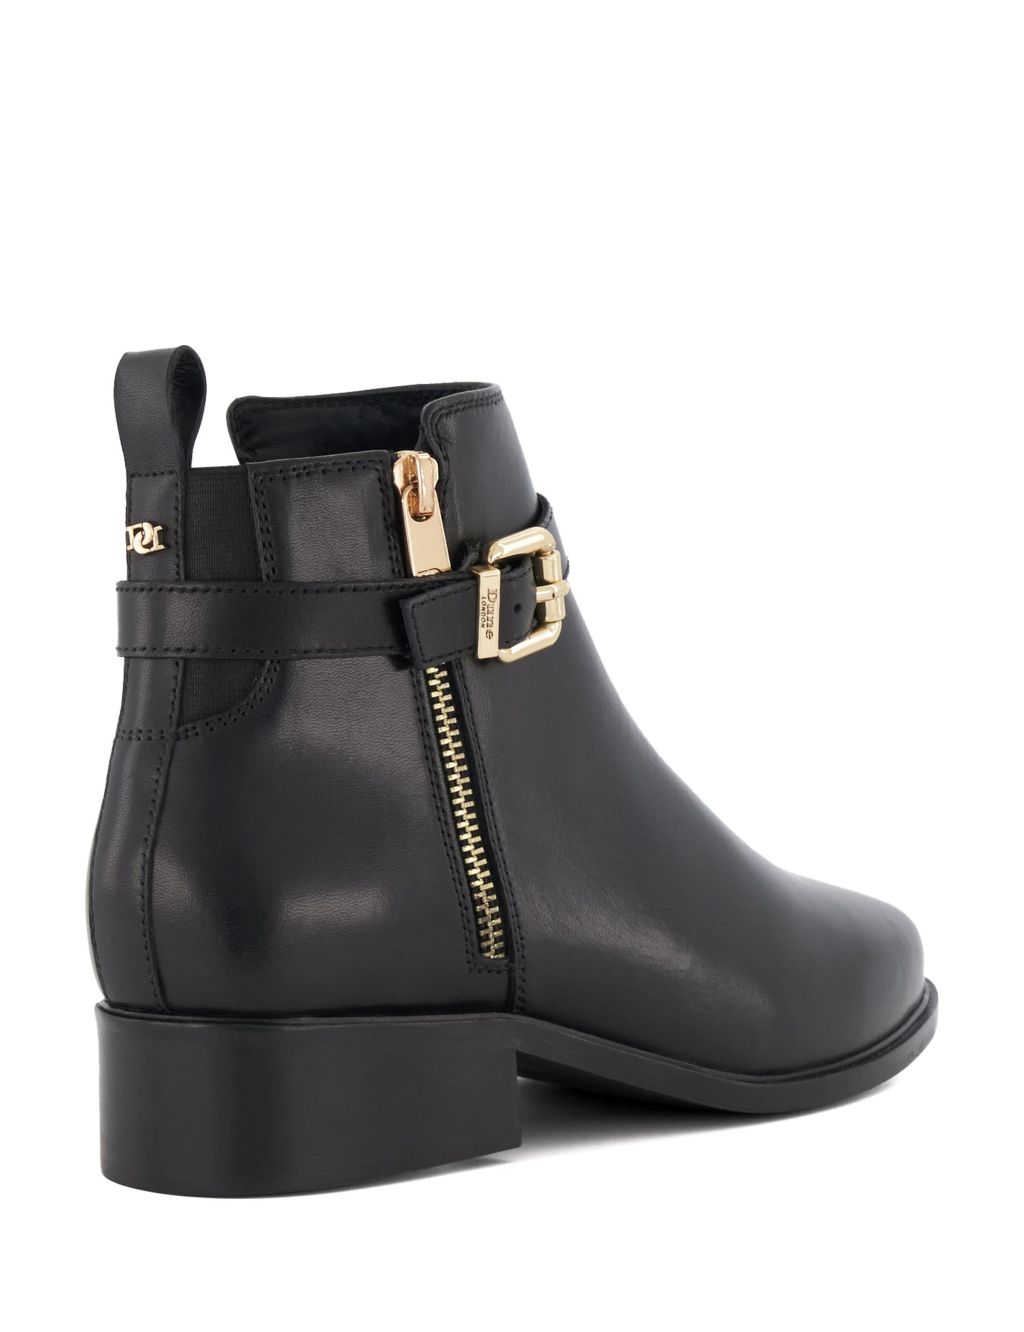 Wide Fit Leather Block Heel Ankle Boots image 3